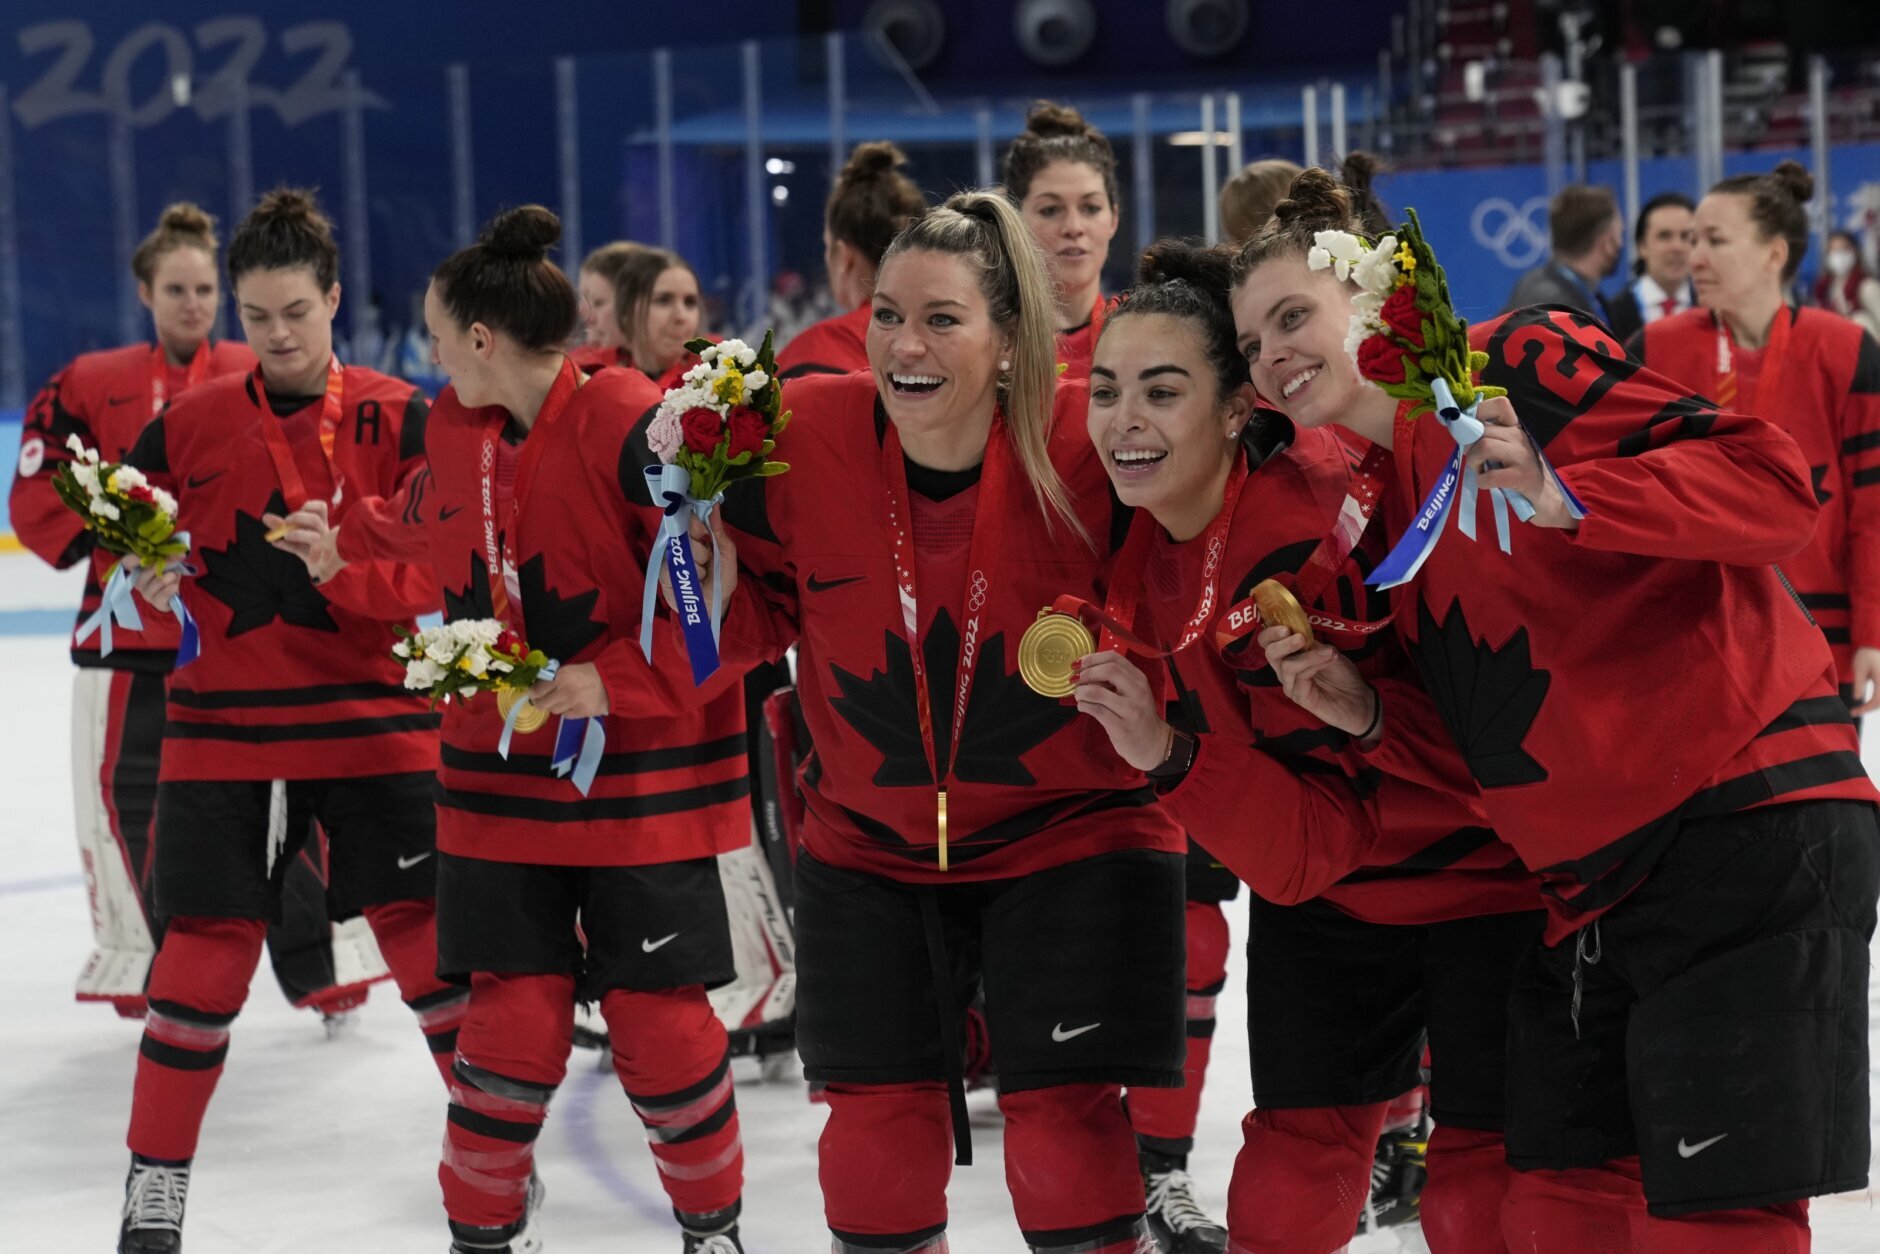 2010 Winter Olympics: Canada tops the U.S. in overtime to win